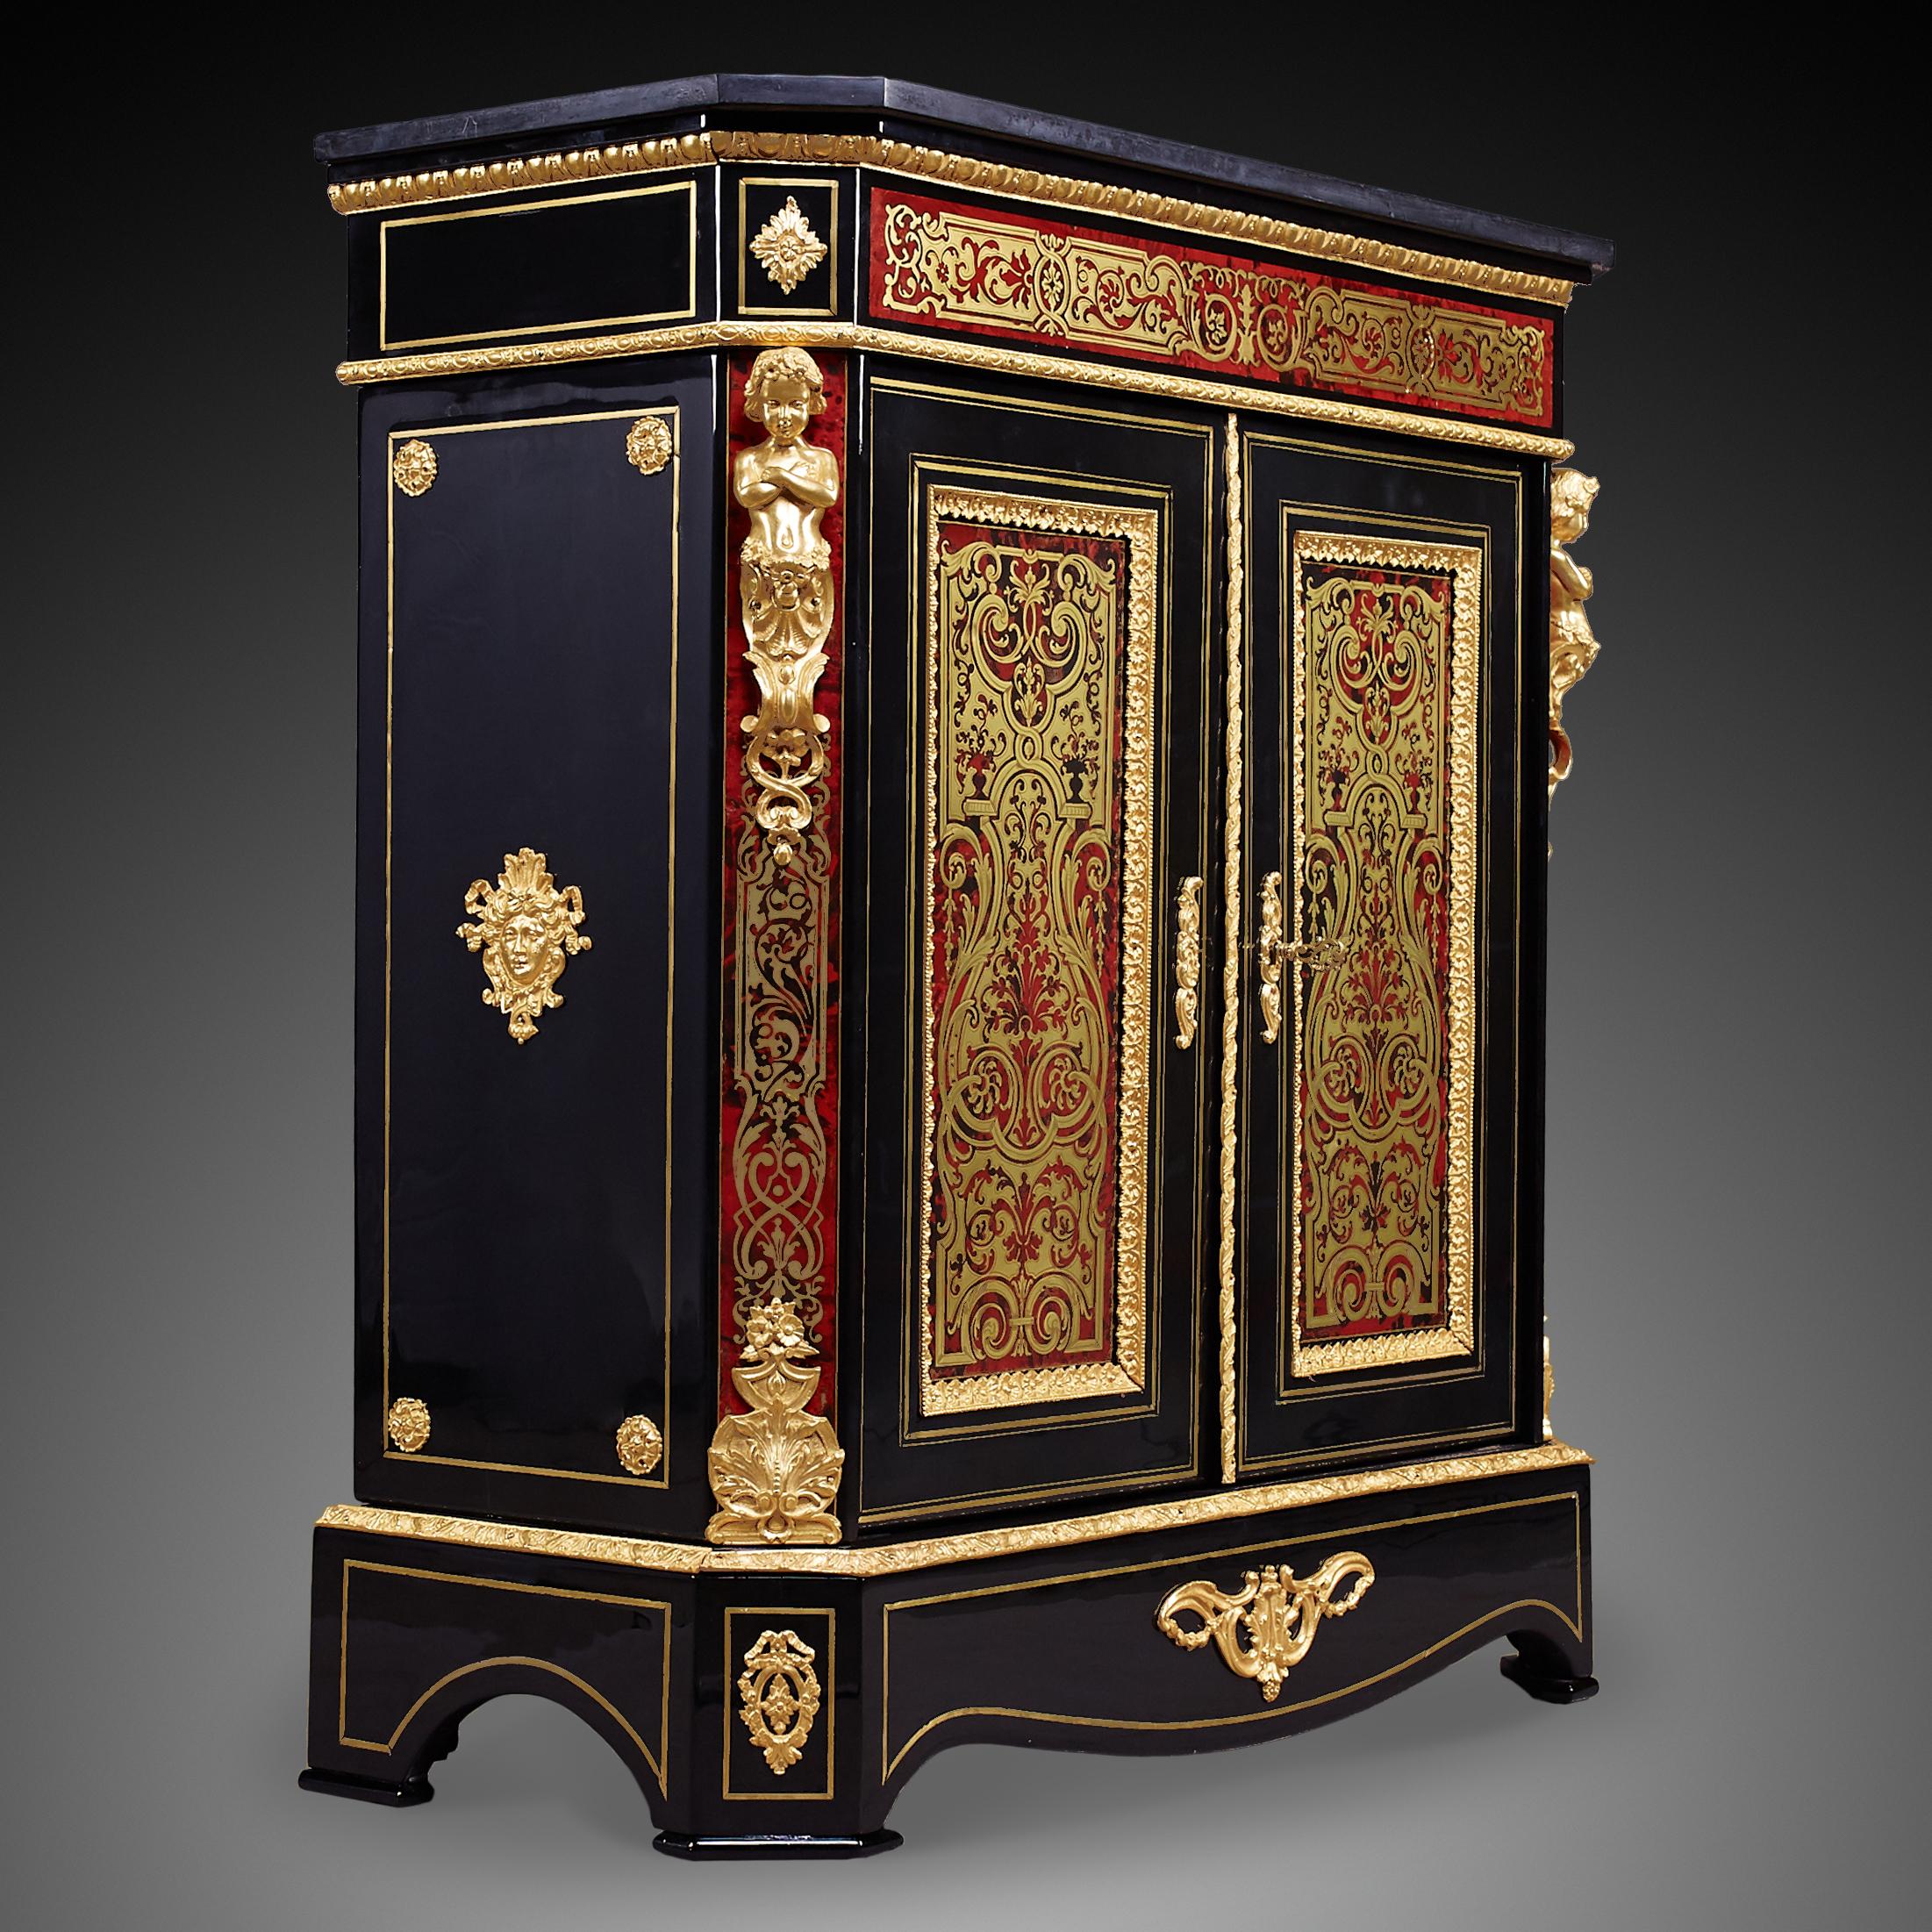 Commode style Boulle of French 19th Century Napoleon III Period. Perfect condition, renovated according to the museum's procedures.